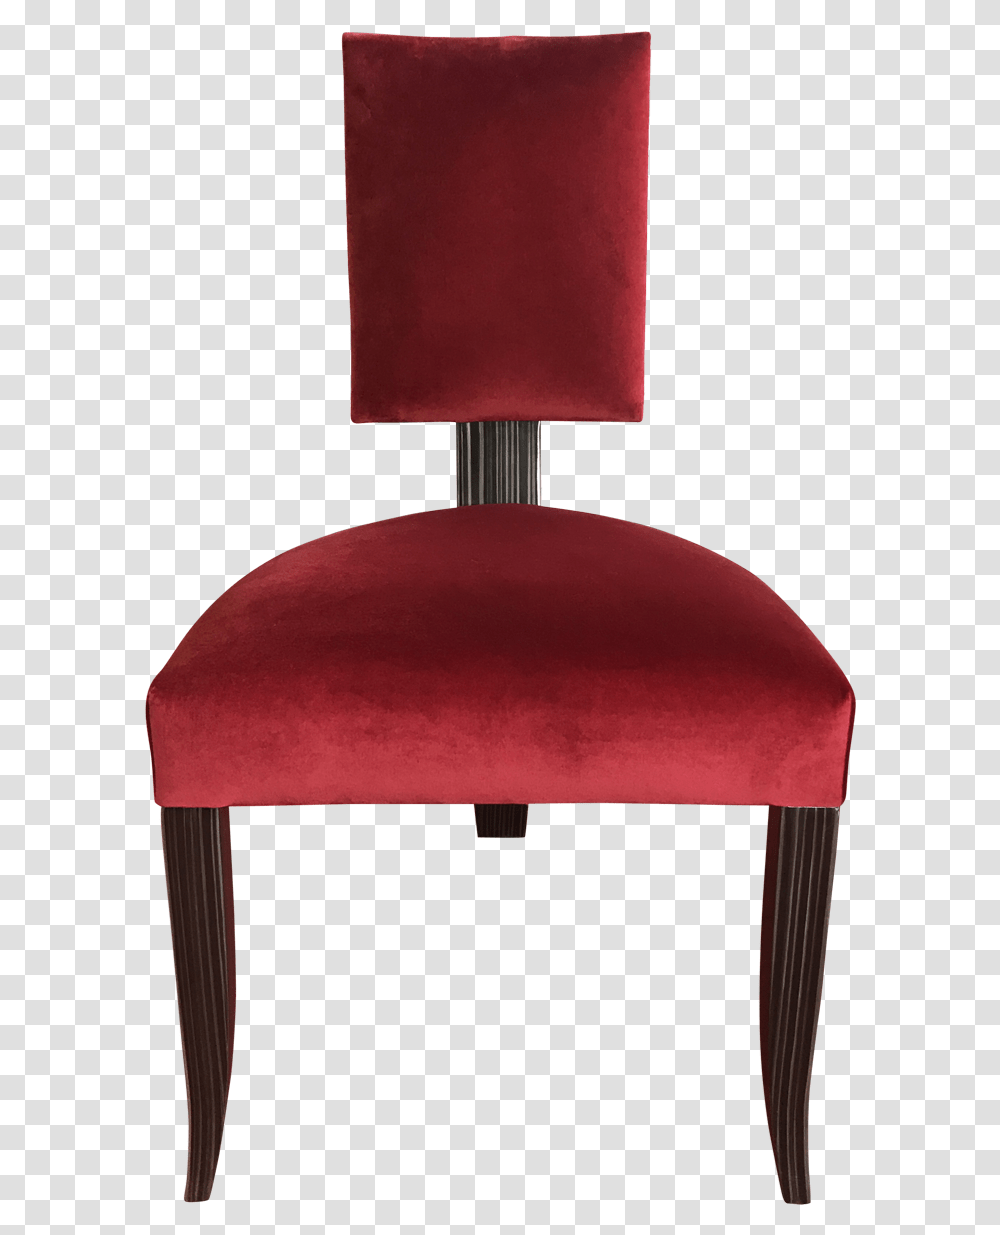 Maharaja Side Chairs Office Chair, Furniture, Lamp, Cushion, Throne Transparent Png